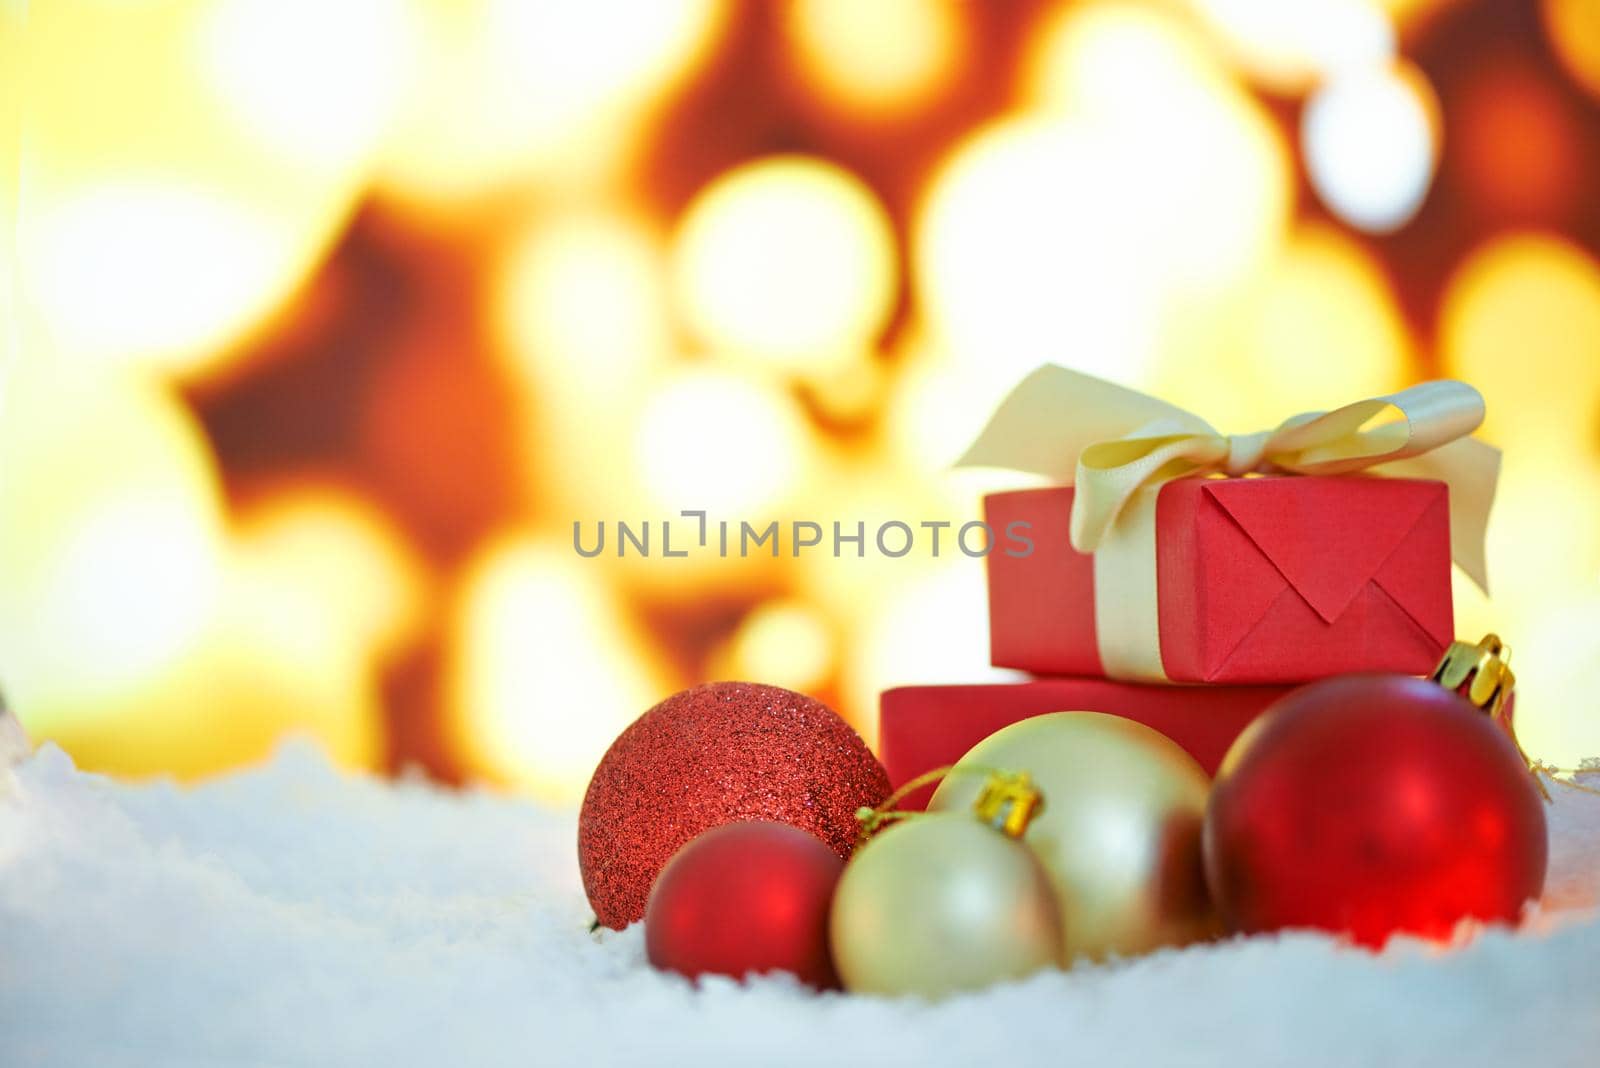 An arrangement of Christmas decorations against a background of lights.